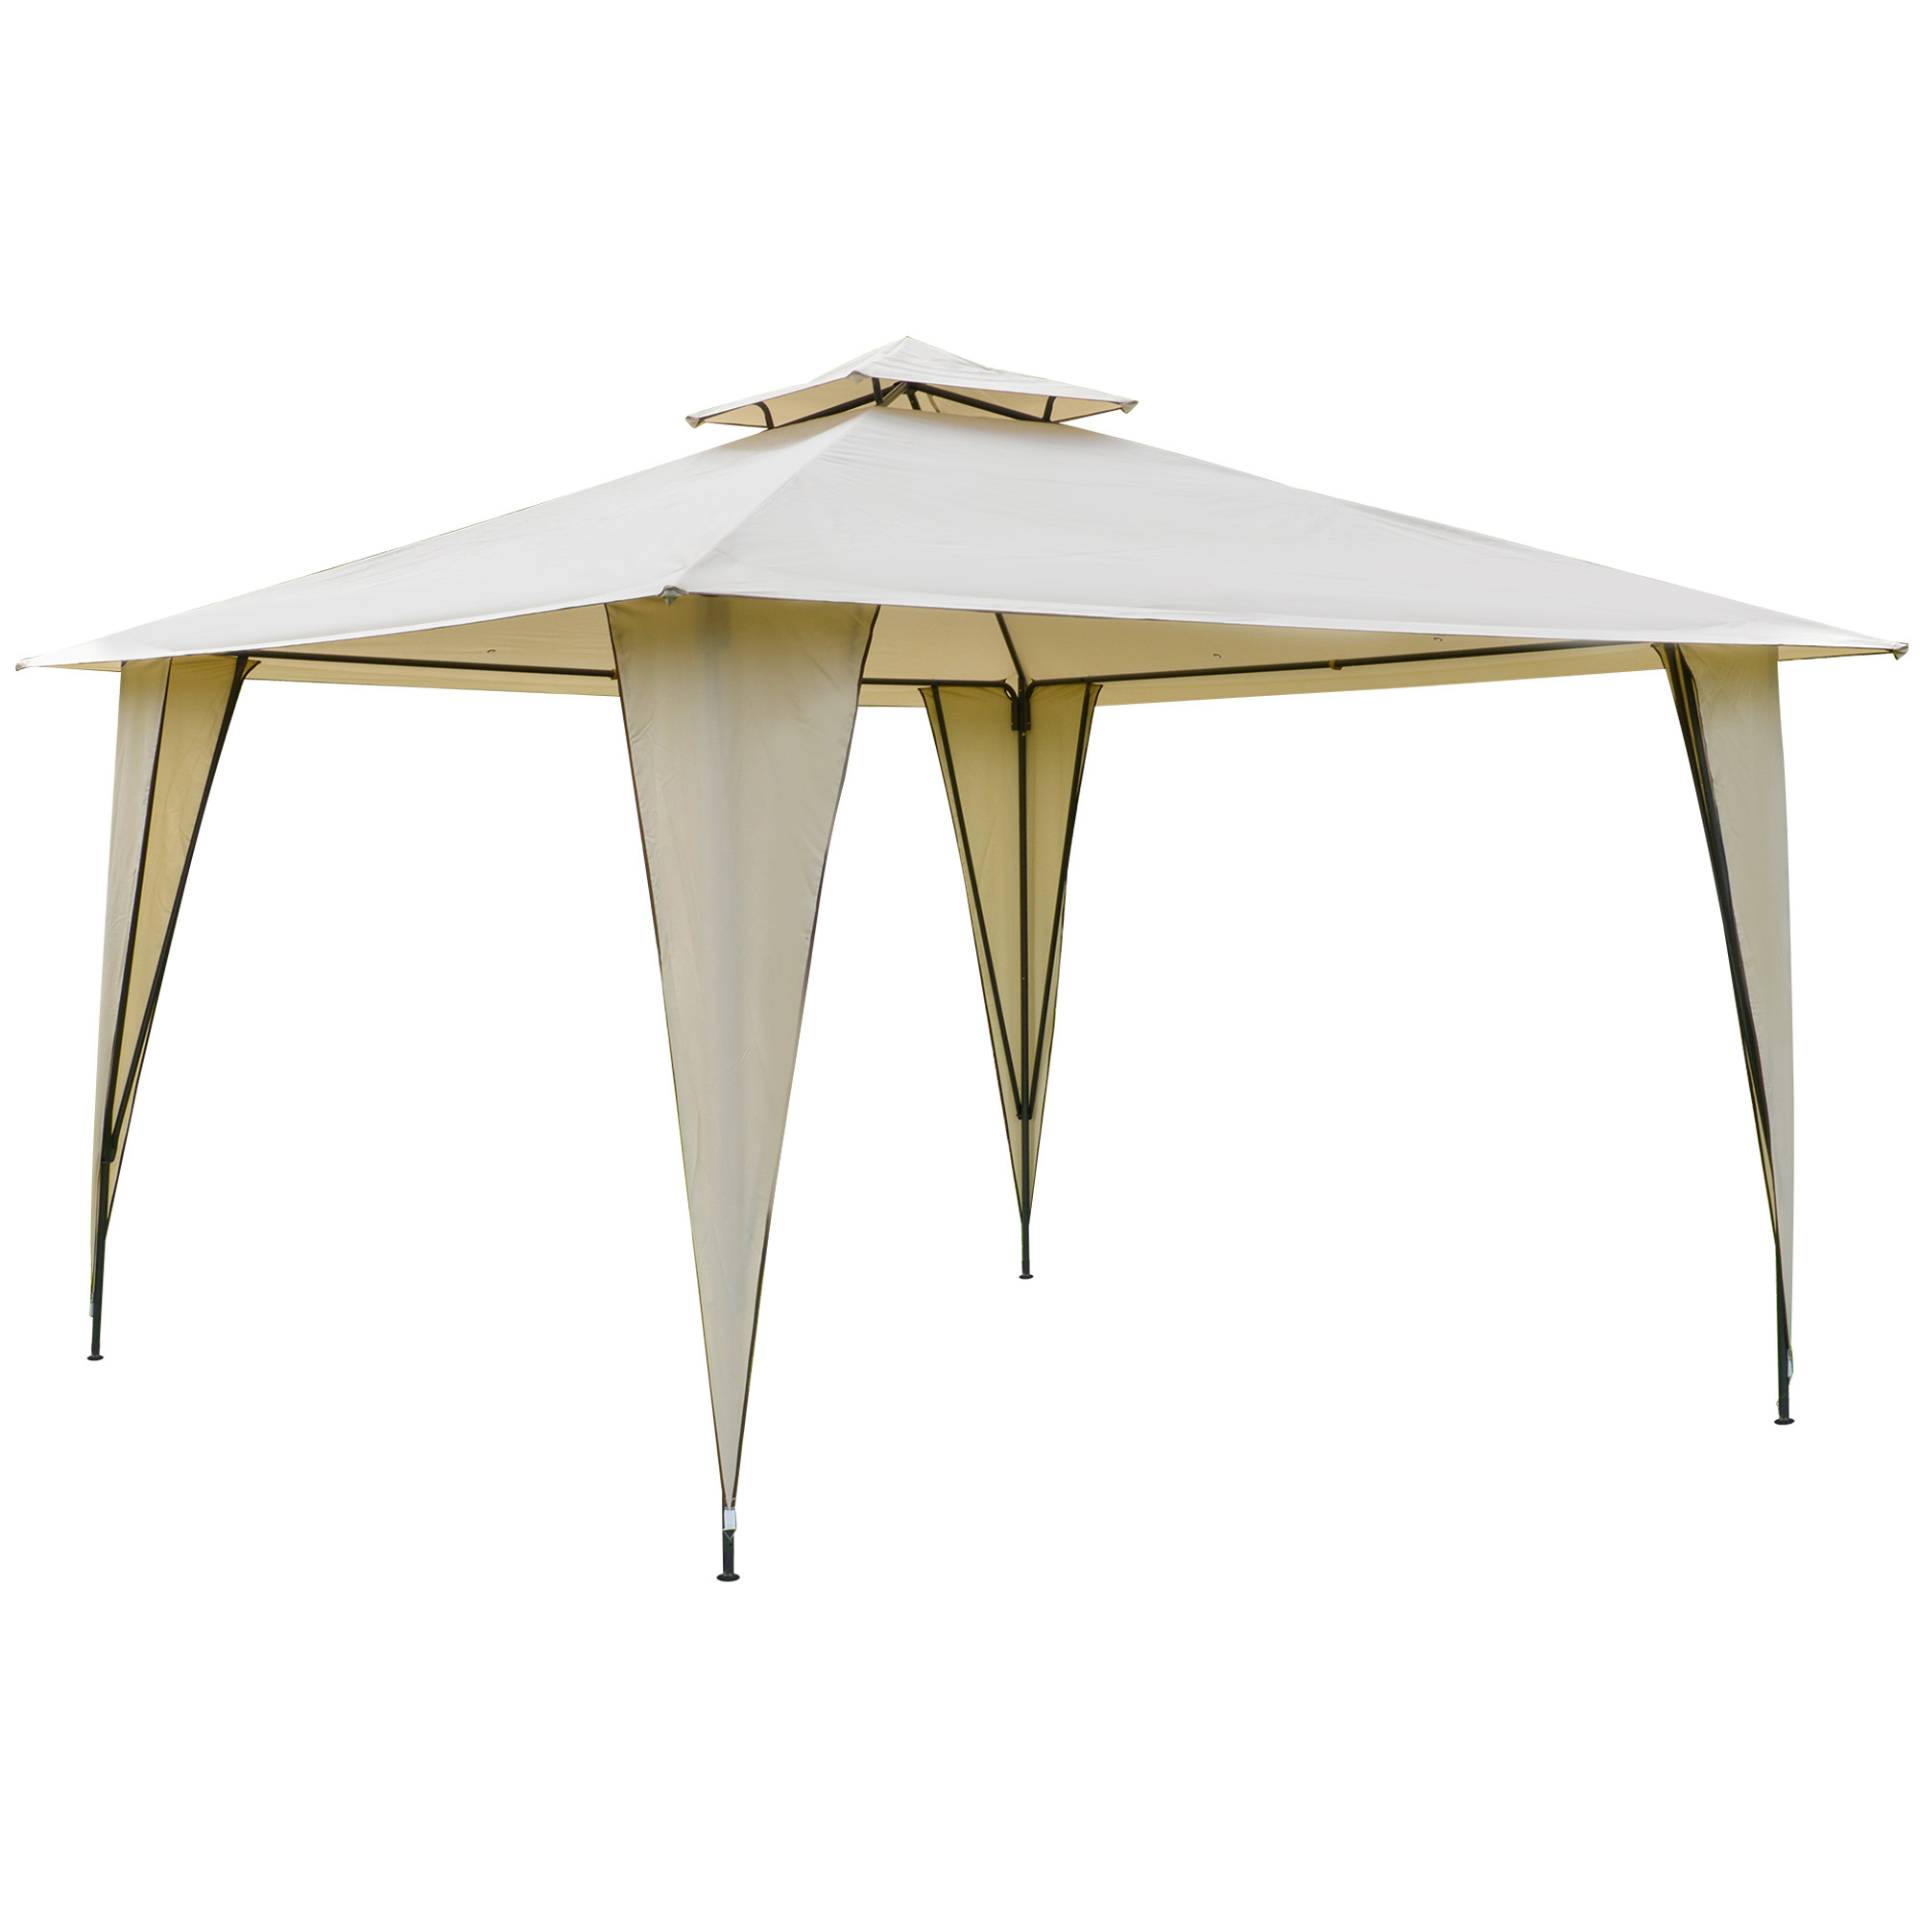 Outsunny 3.5x3.5m Side-Less Outdoor Canopy Tent Gazebo w/ 2-Tier Roof Steel Fram